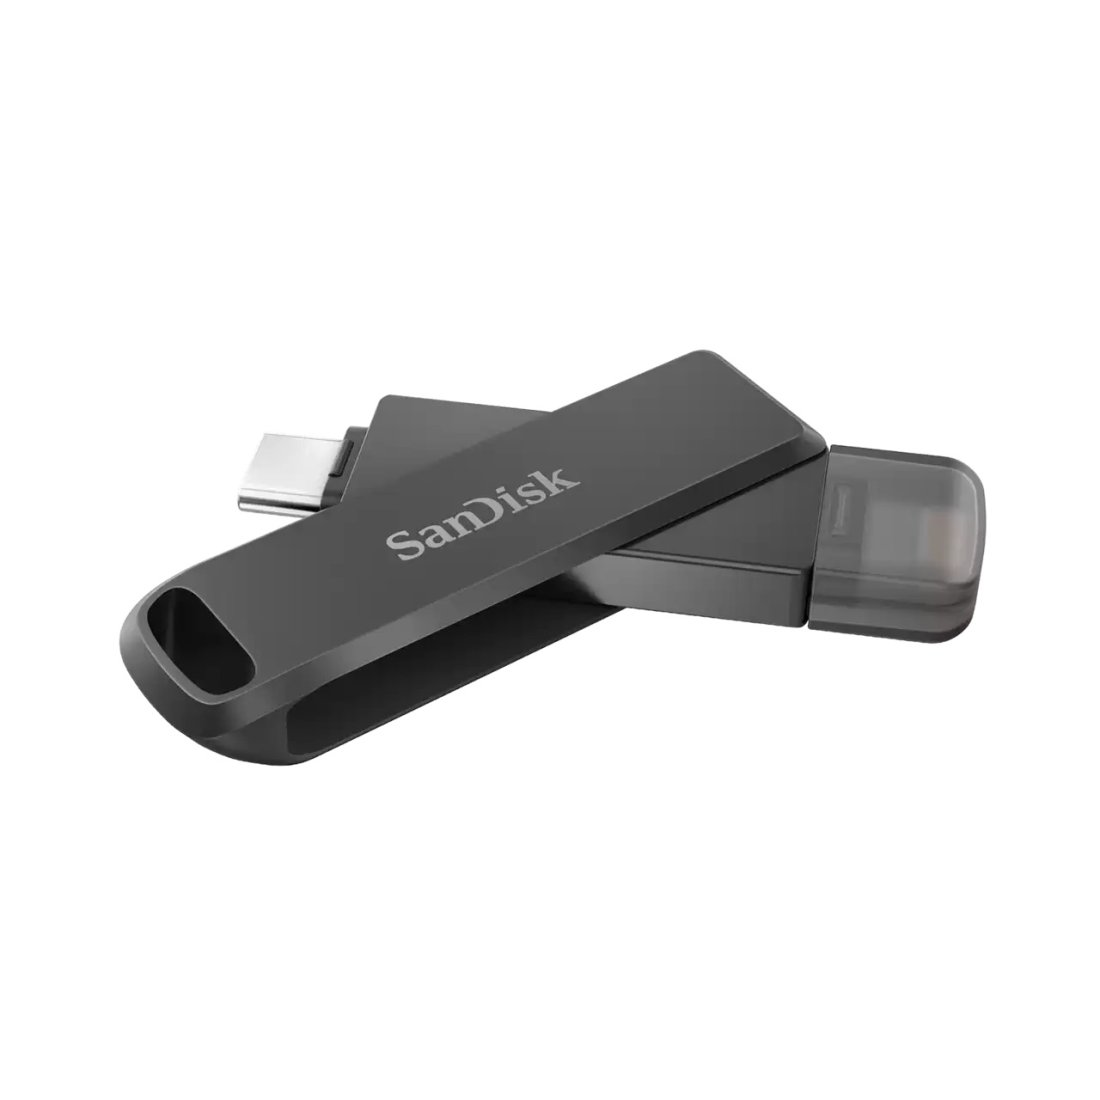 SanDisk iXpand Flash Drive Luxe - 128 GB